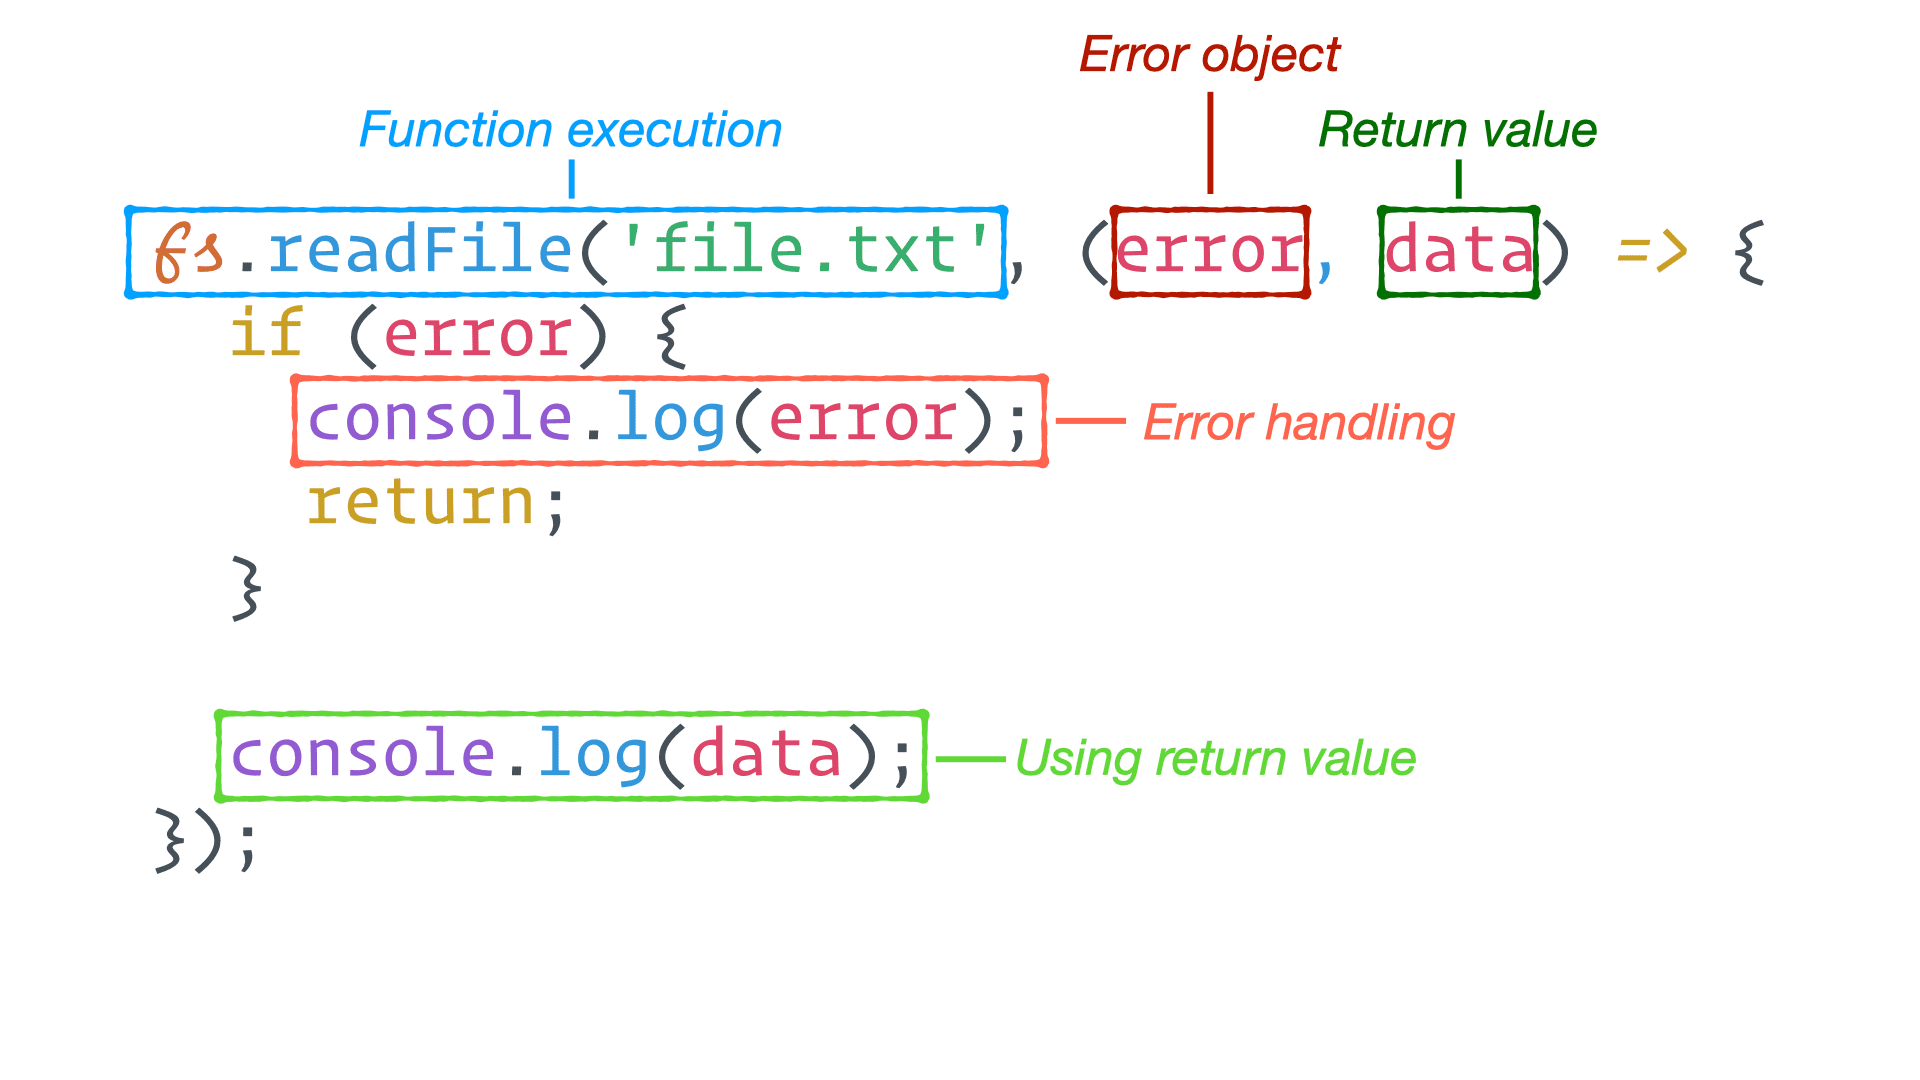 Reading a file in Node.js with fs.readFile and a callback function. Five parts of asynchronous code flow are circled: function execution, error object, return value, error handling and using the return value.